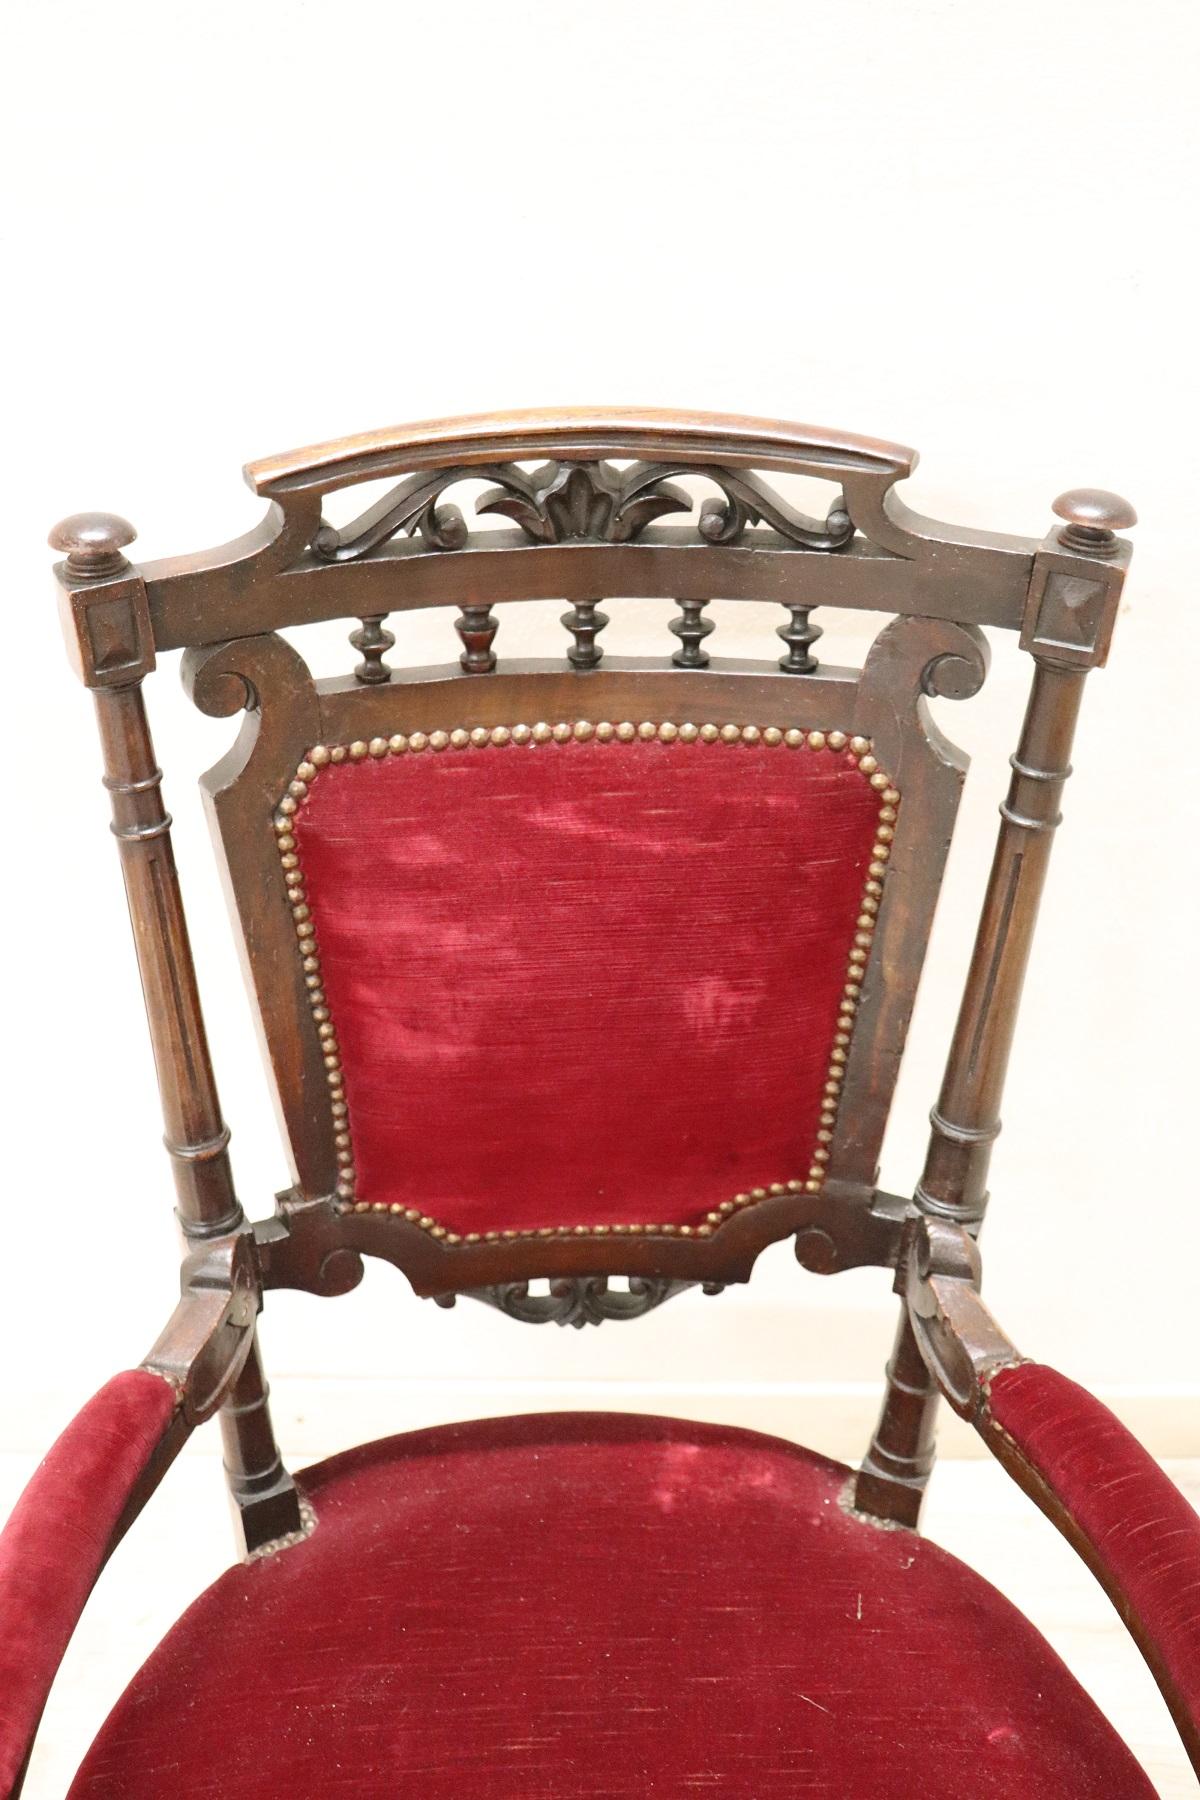 Italian armchair antique Louis XVI style with seat in elegant red velvet. The shape of the chair is very linear with straight legs in perfect Louis XVI taste. The back has particular carving work. Wide and comfortable seat. Beautiful armchair ideal